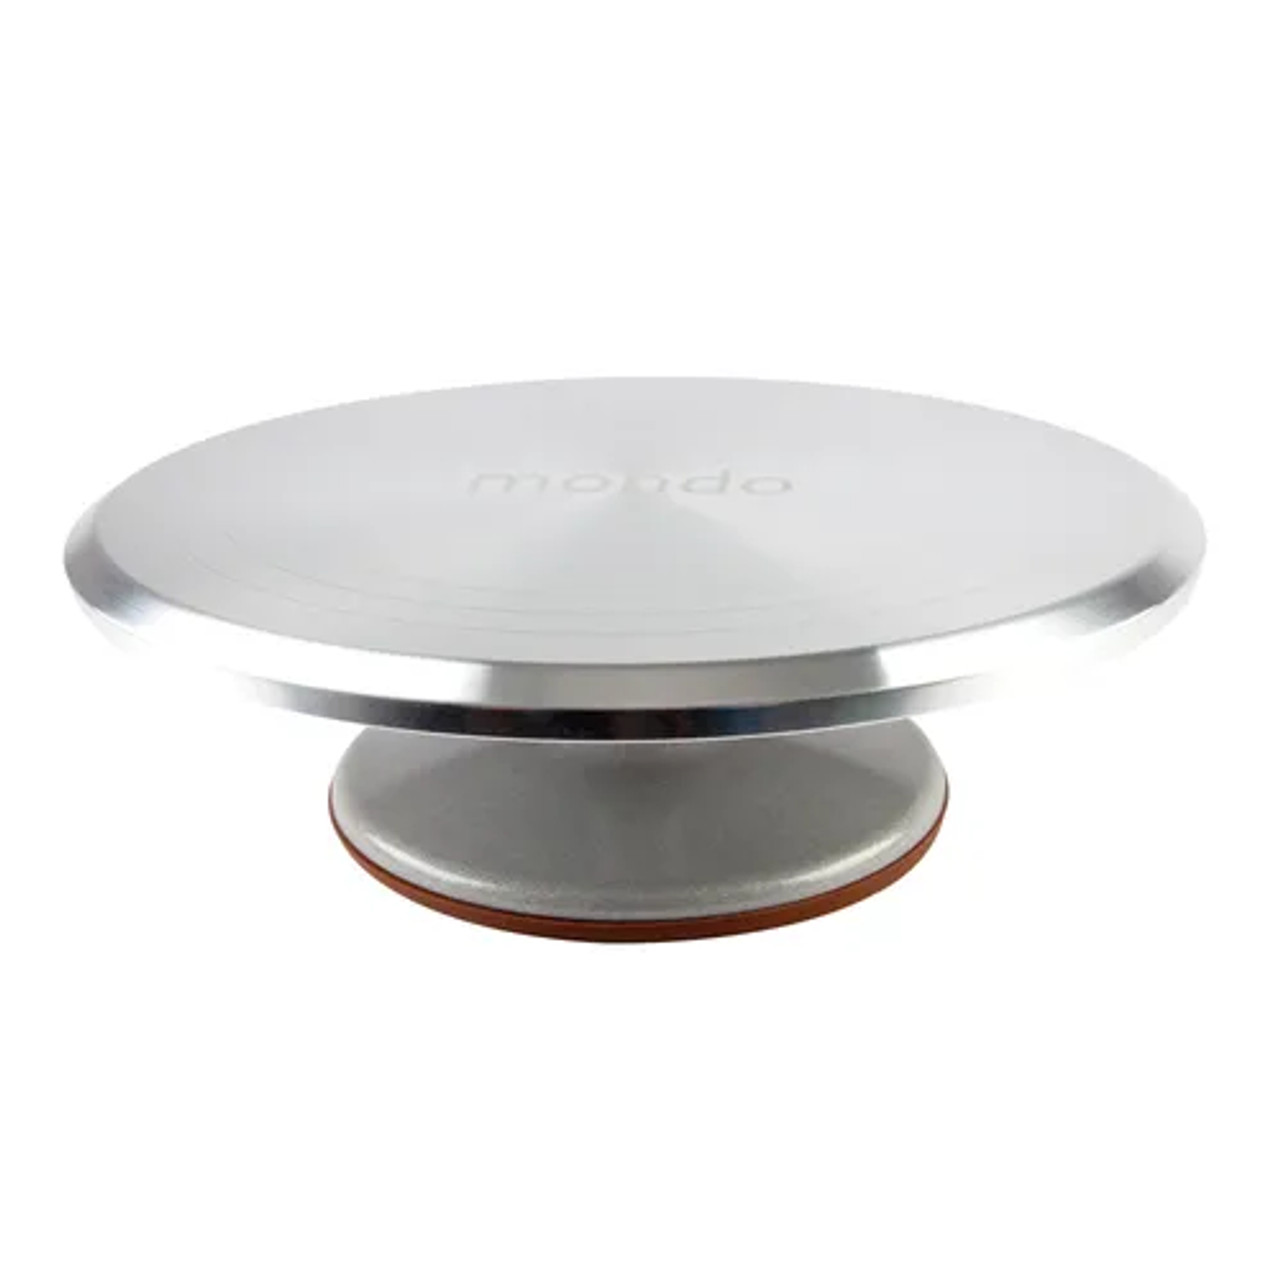 Ready Stock!!! Aluminium Turntable Cake Turntable Decorating Turntable  Baking Stand Round Turn Table